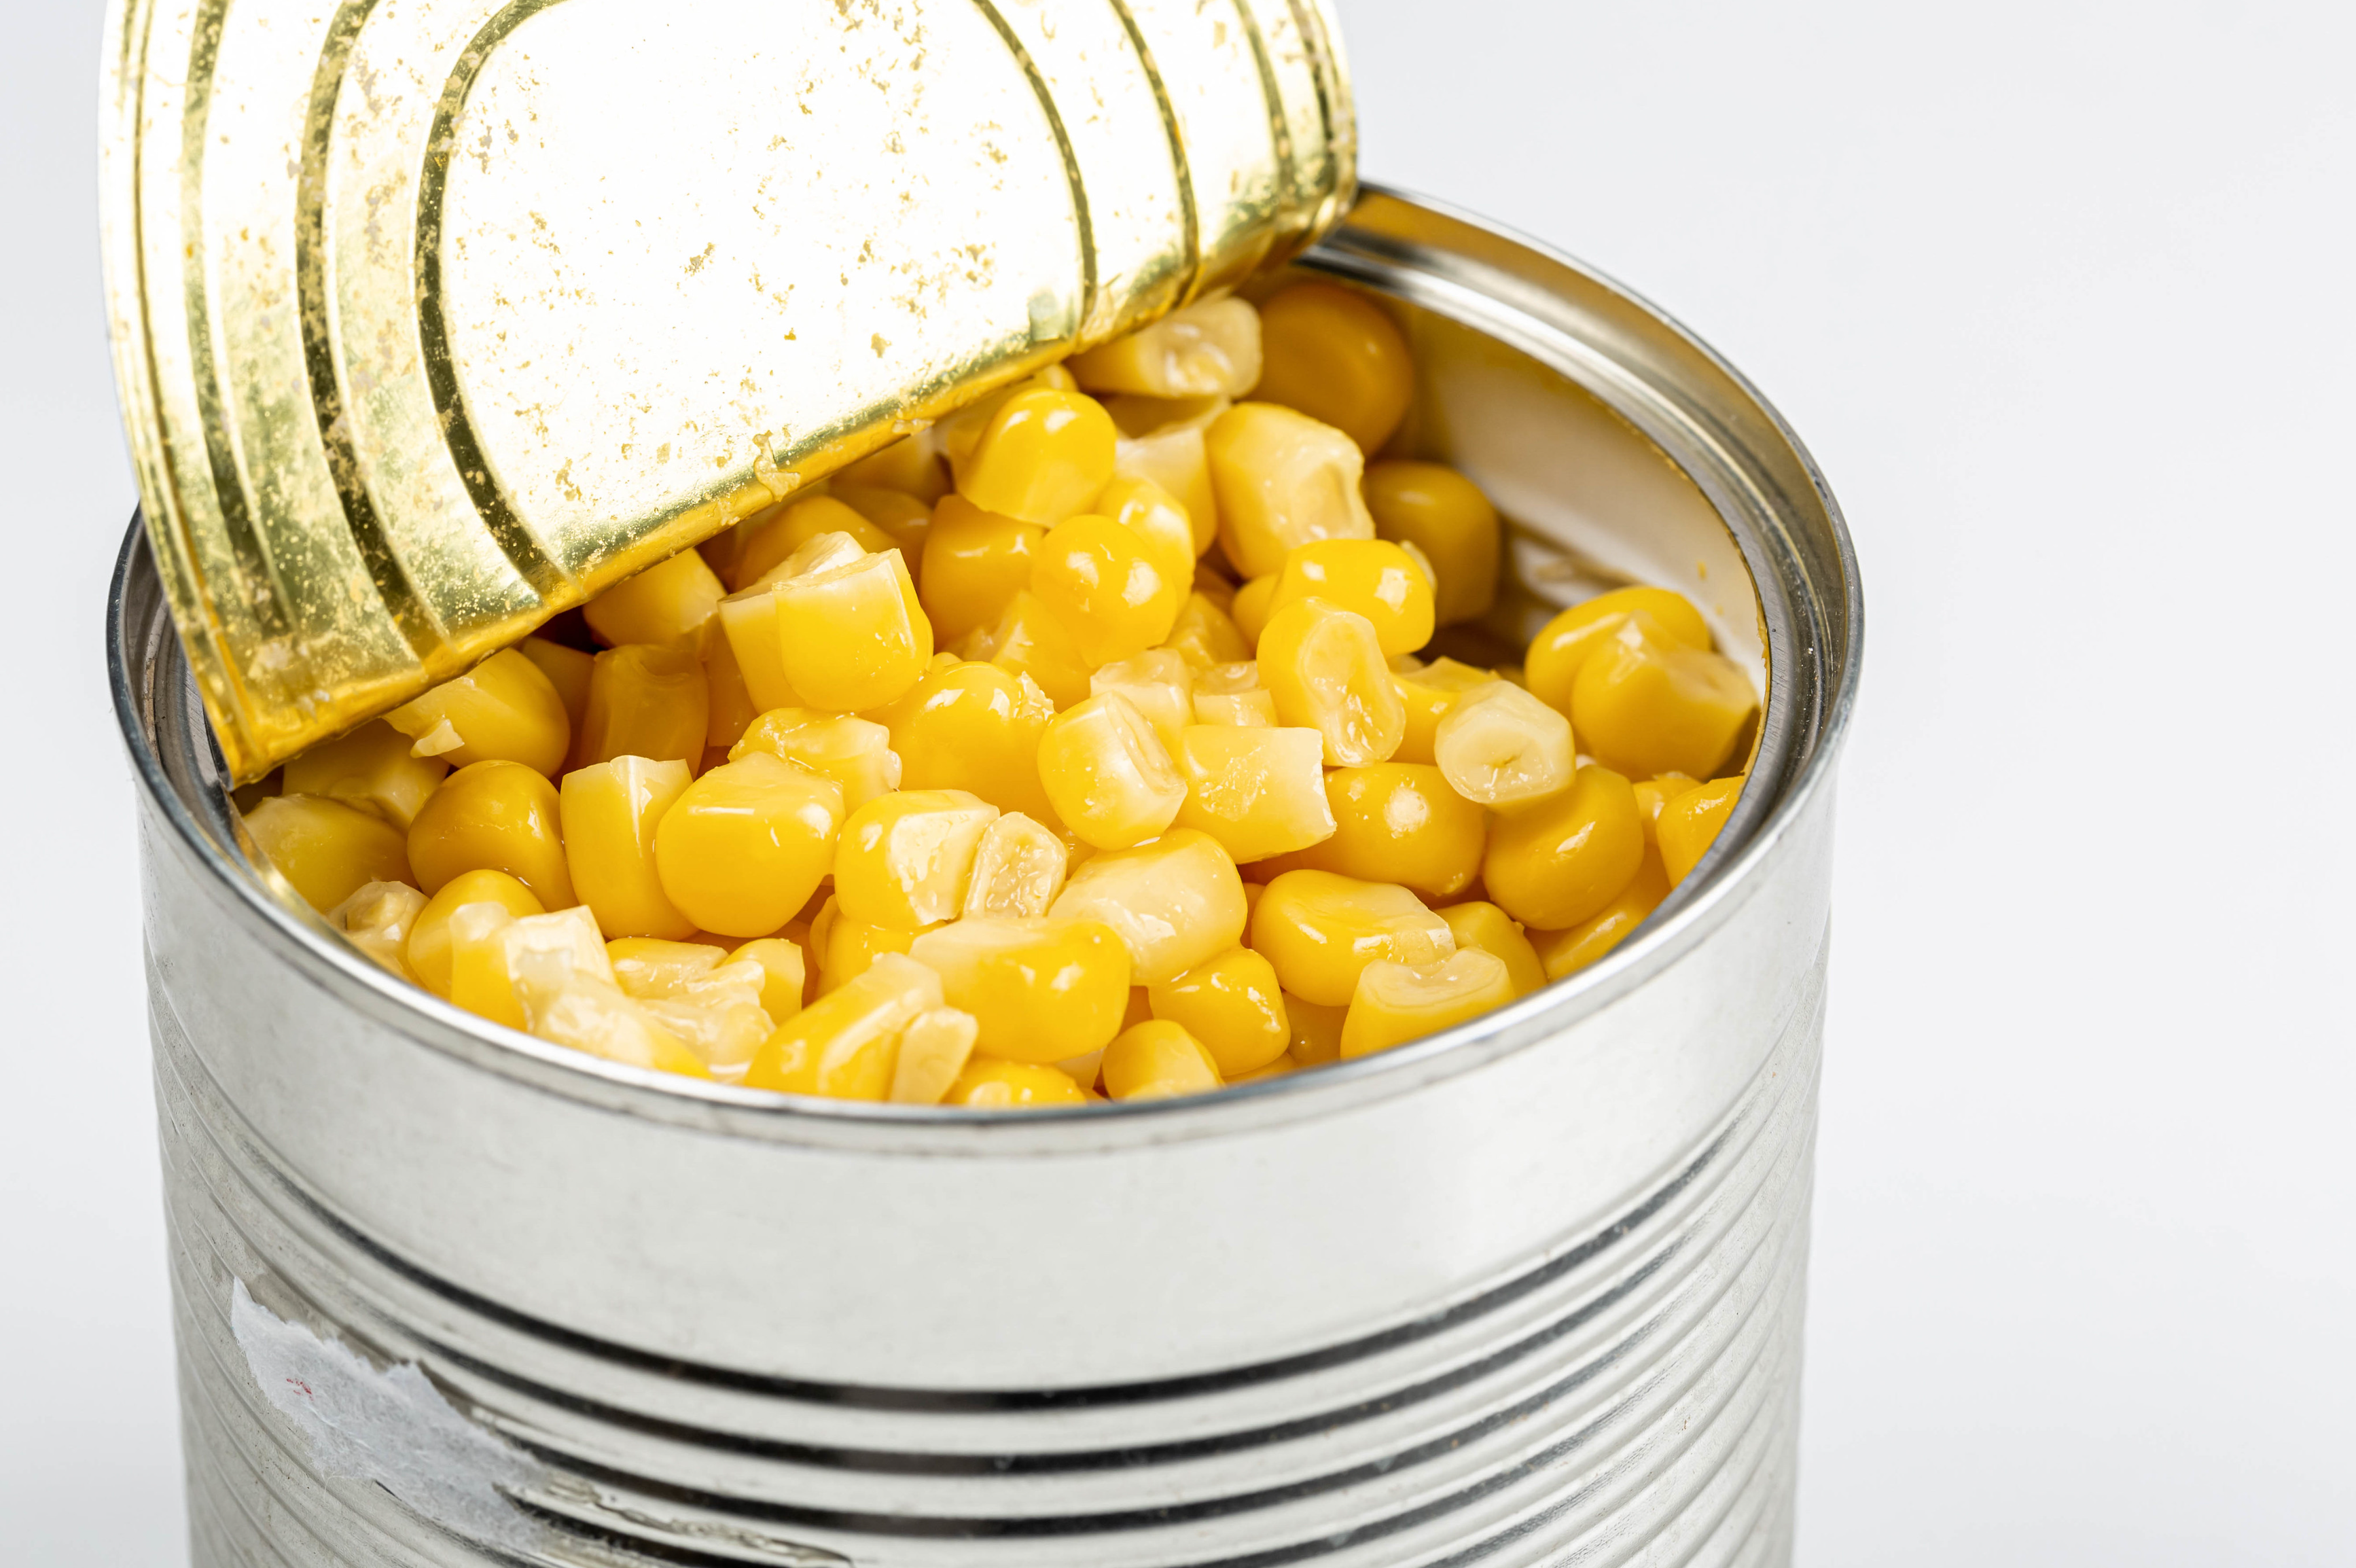 Open tin can with corn kernels on white background credit Marco Verch CC BY 2.0